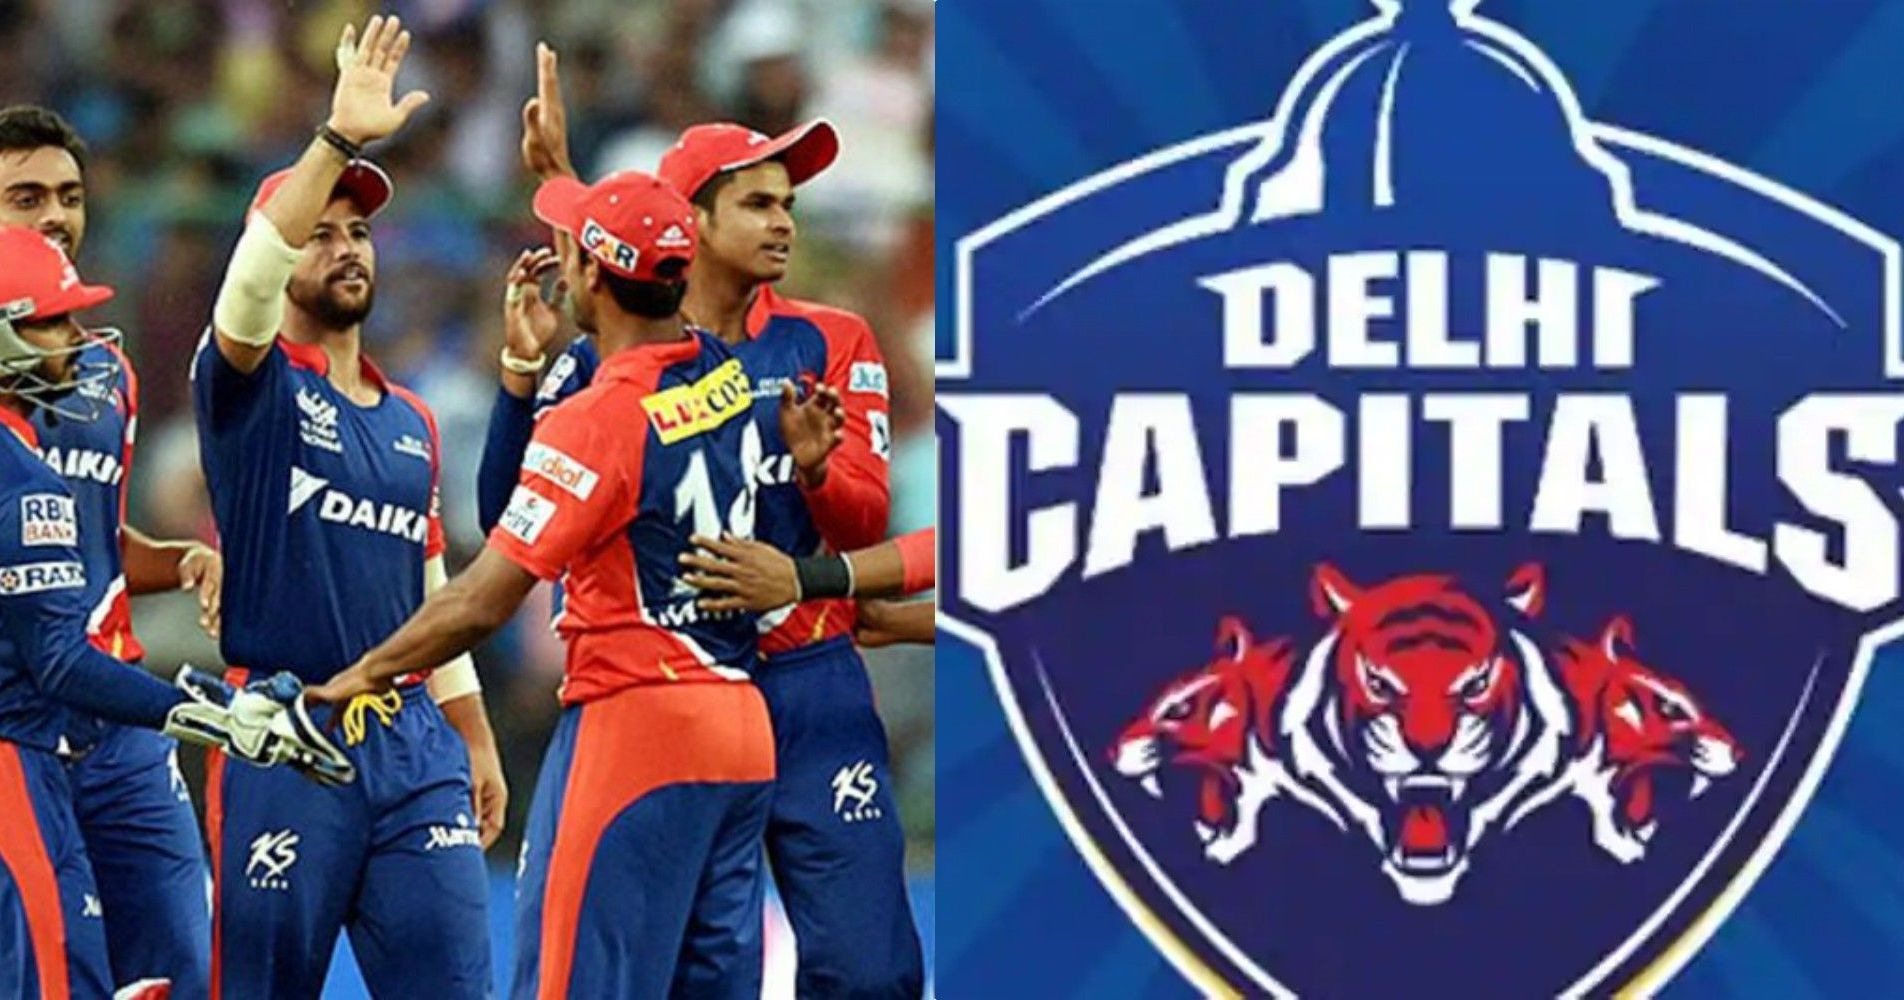 Ahead of IPl 2019 Delhi Daredevils Changed Their Name To Delhi Capitals,  Here's How Twitterati Reacted To It